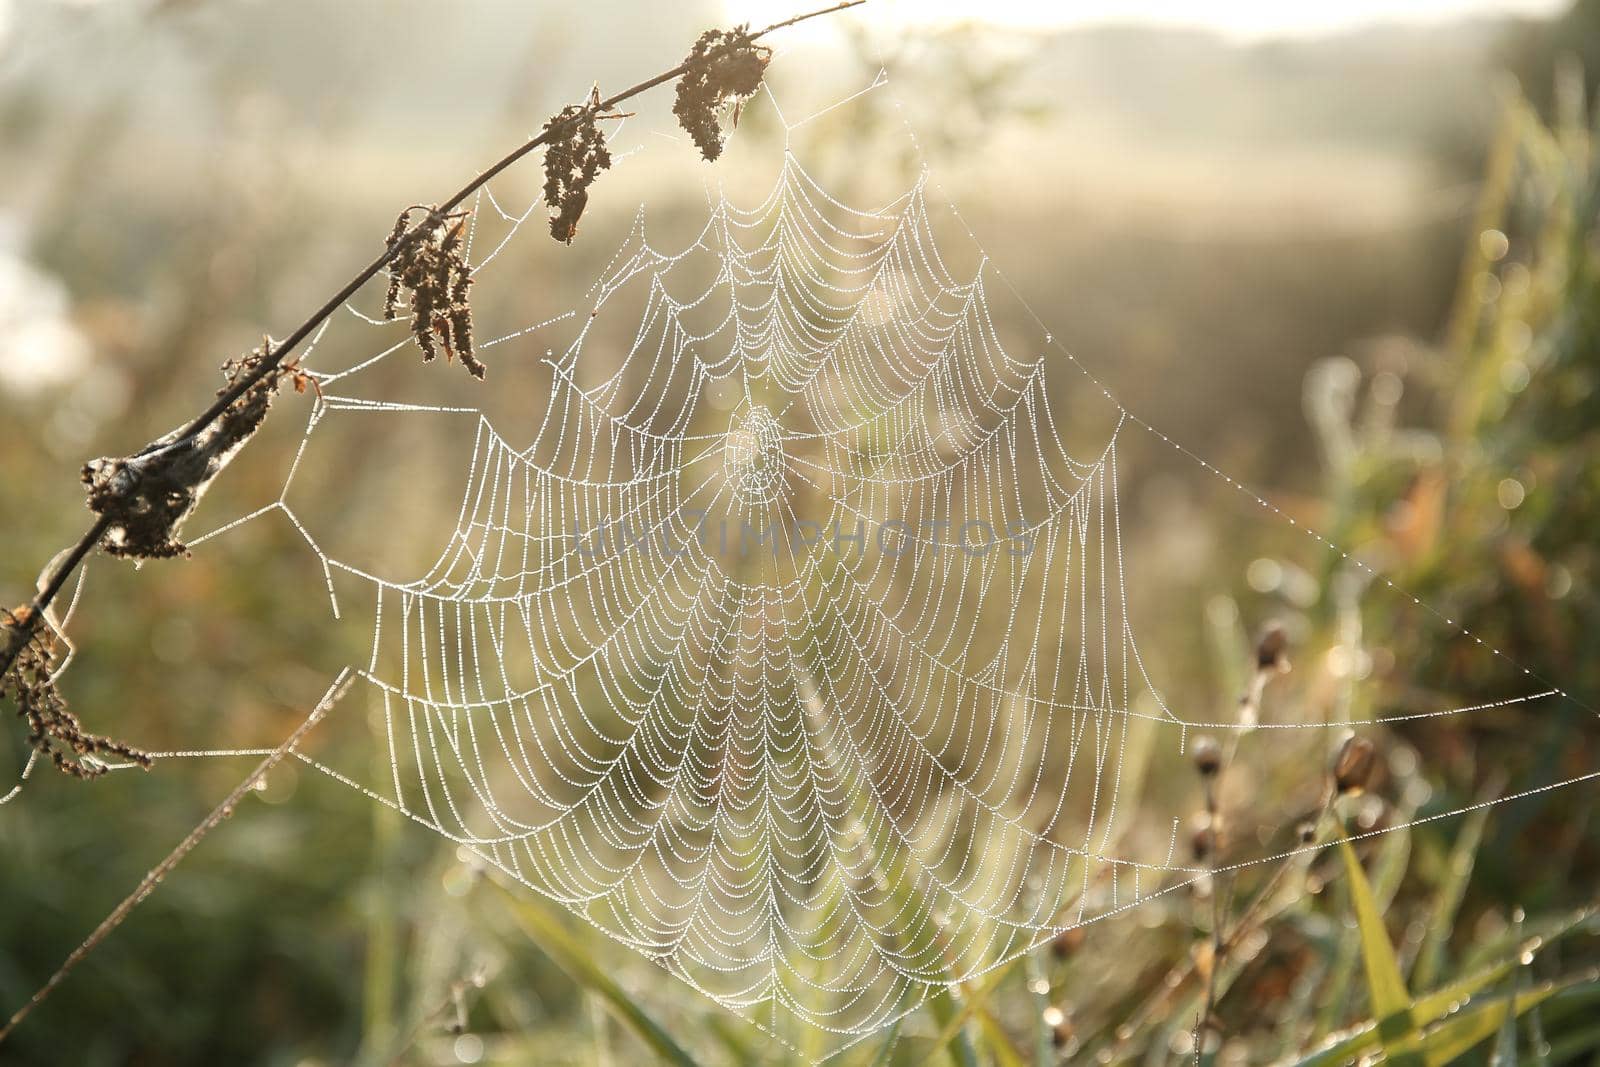 Spider web by nature78